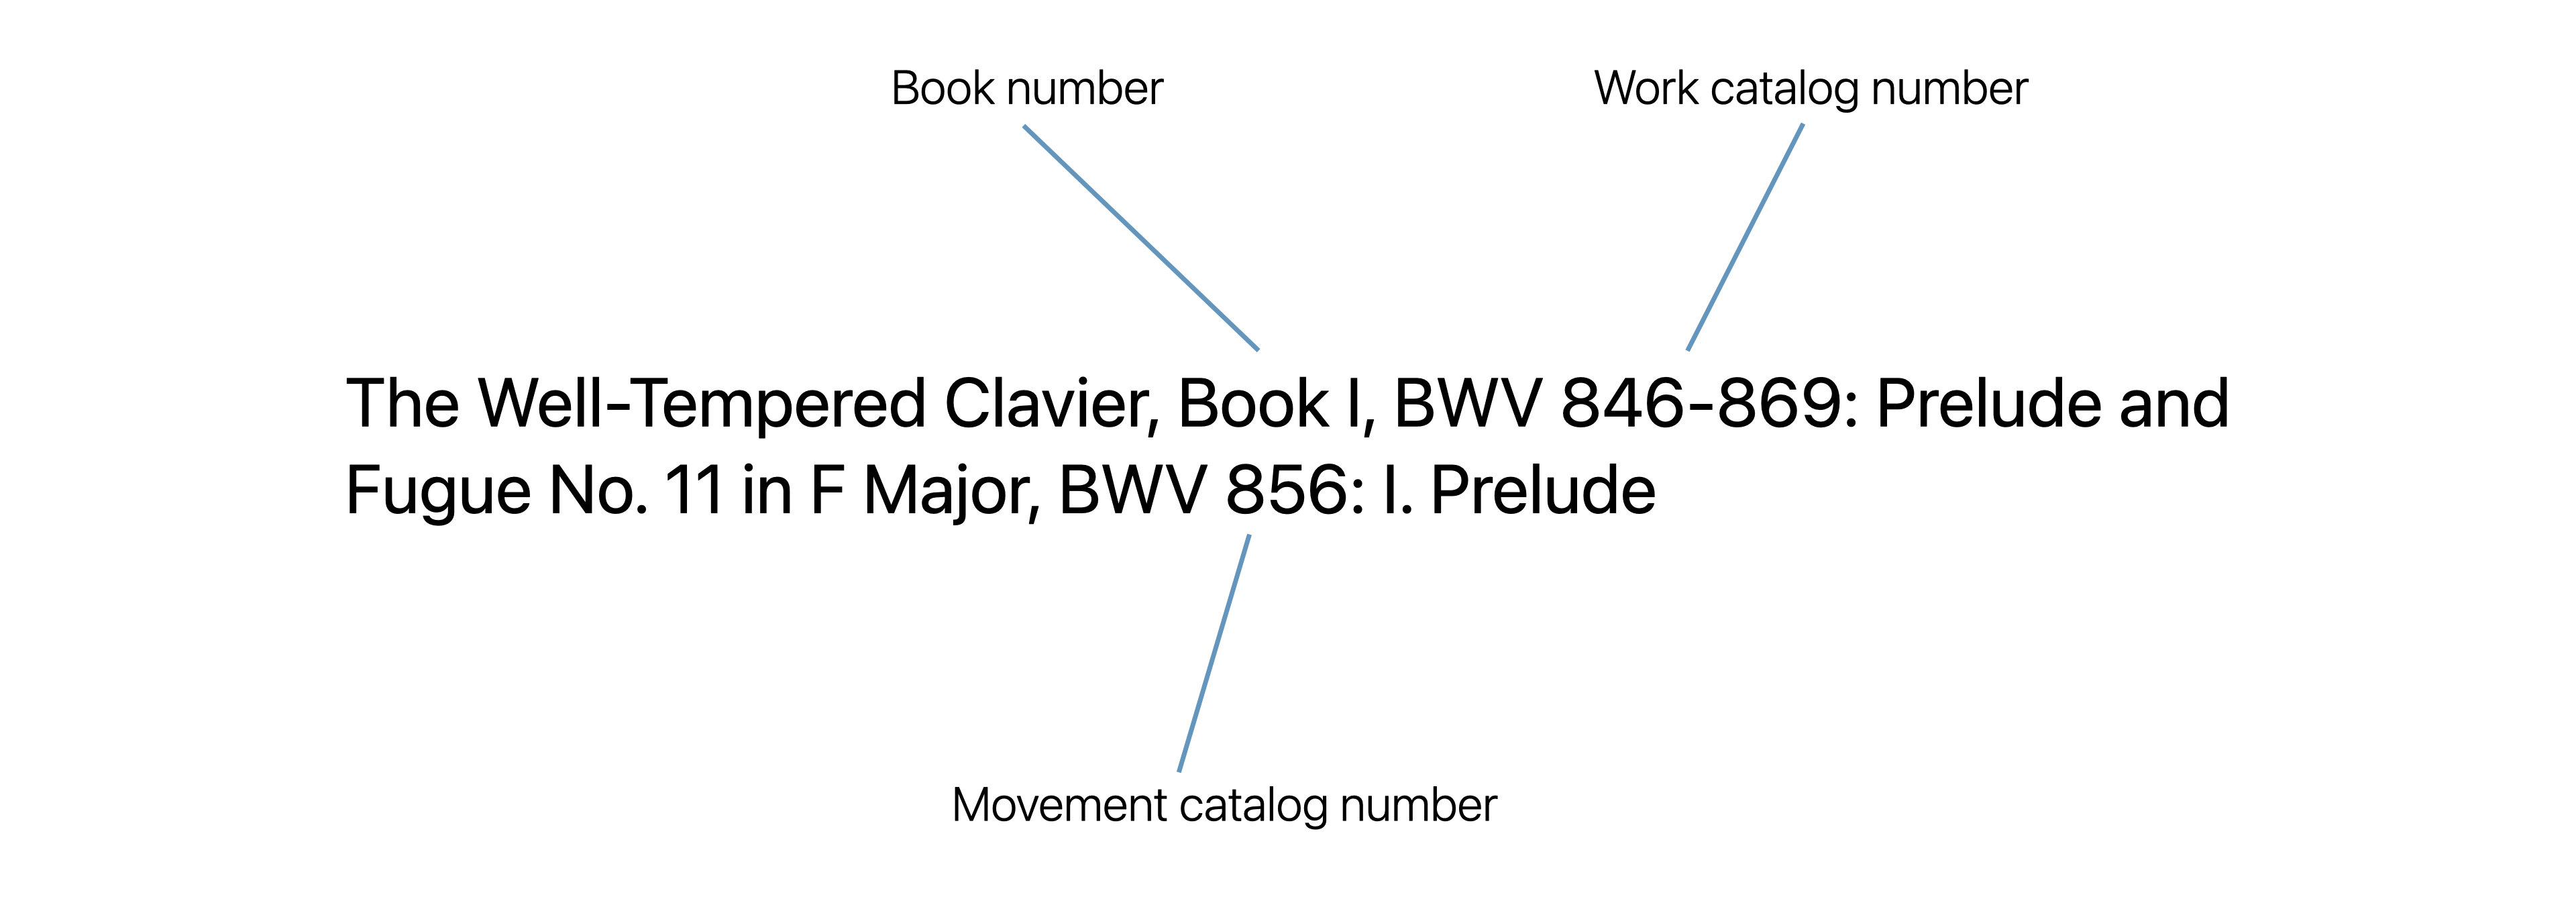 Example of multi-level classical work with colons used to divide tiers of track hierarchy.